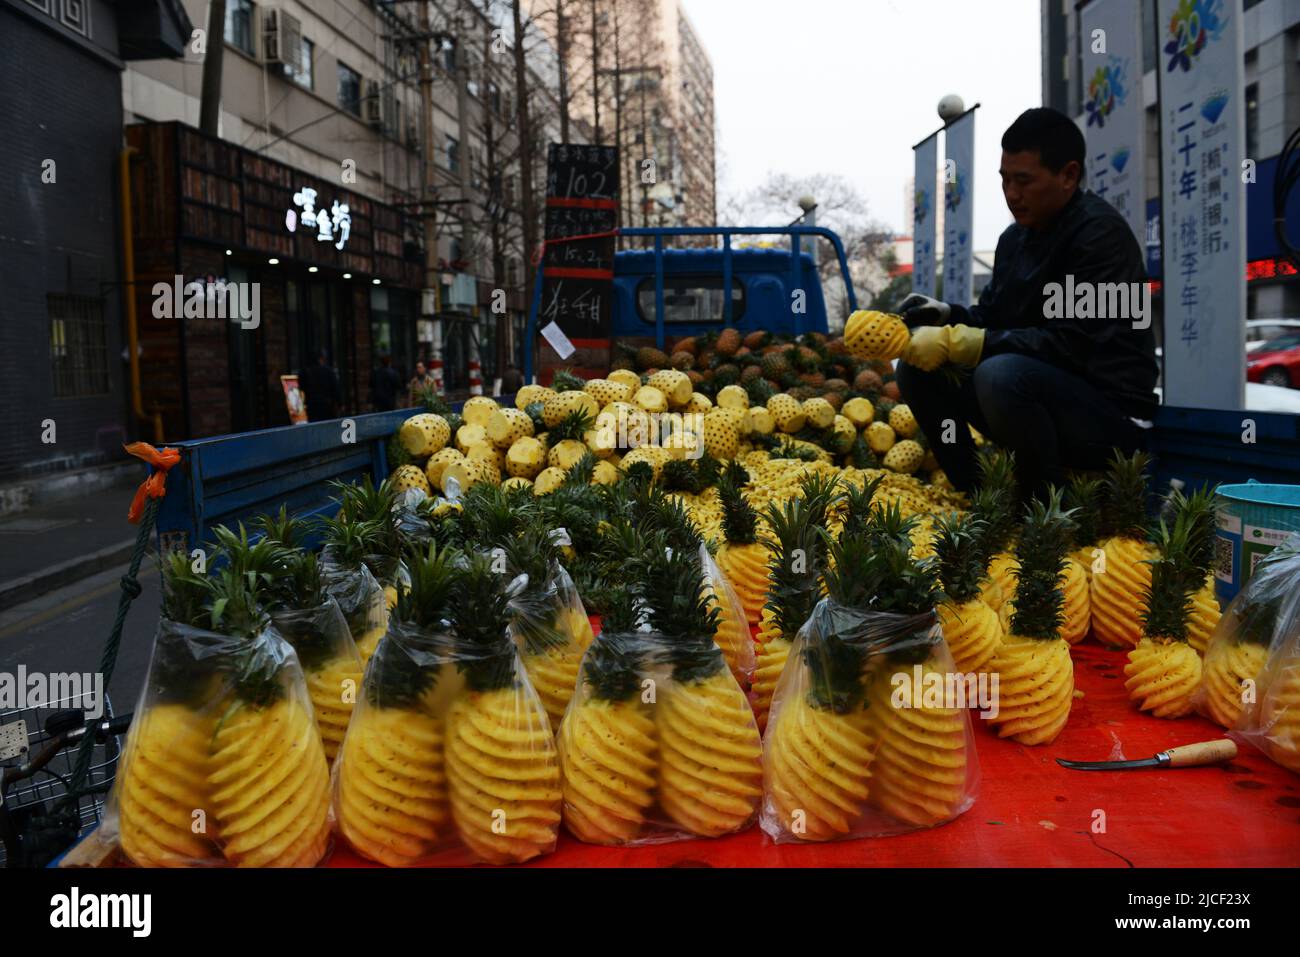 A local man selling peeled pineapples in Nanjing, China. Stock Photo